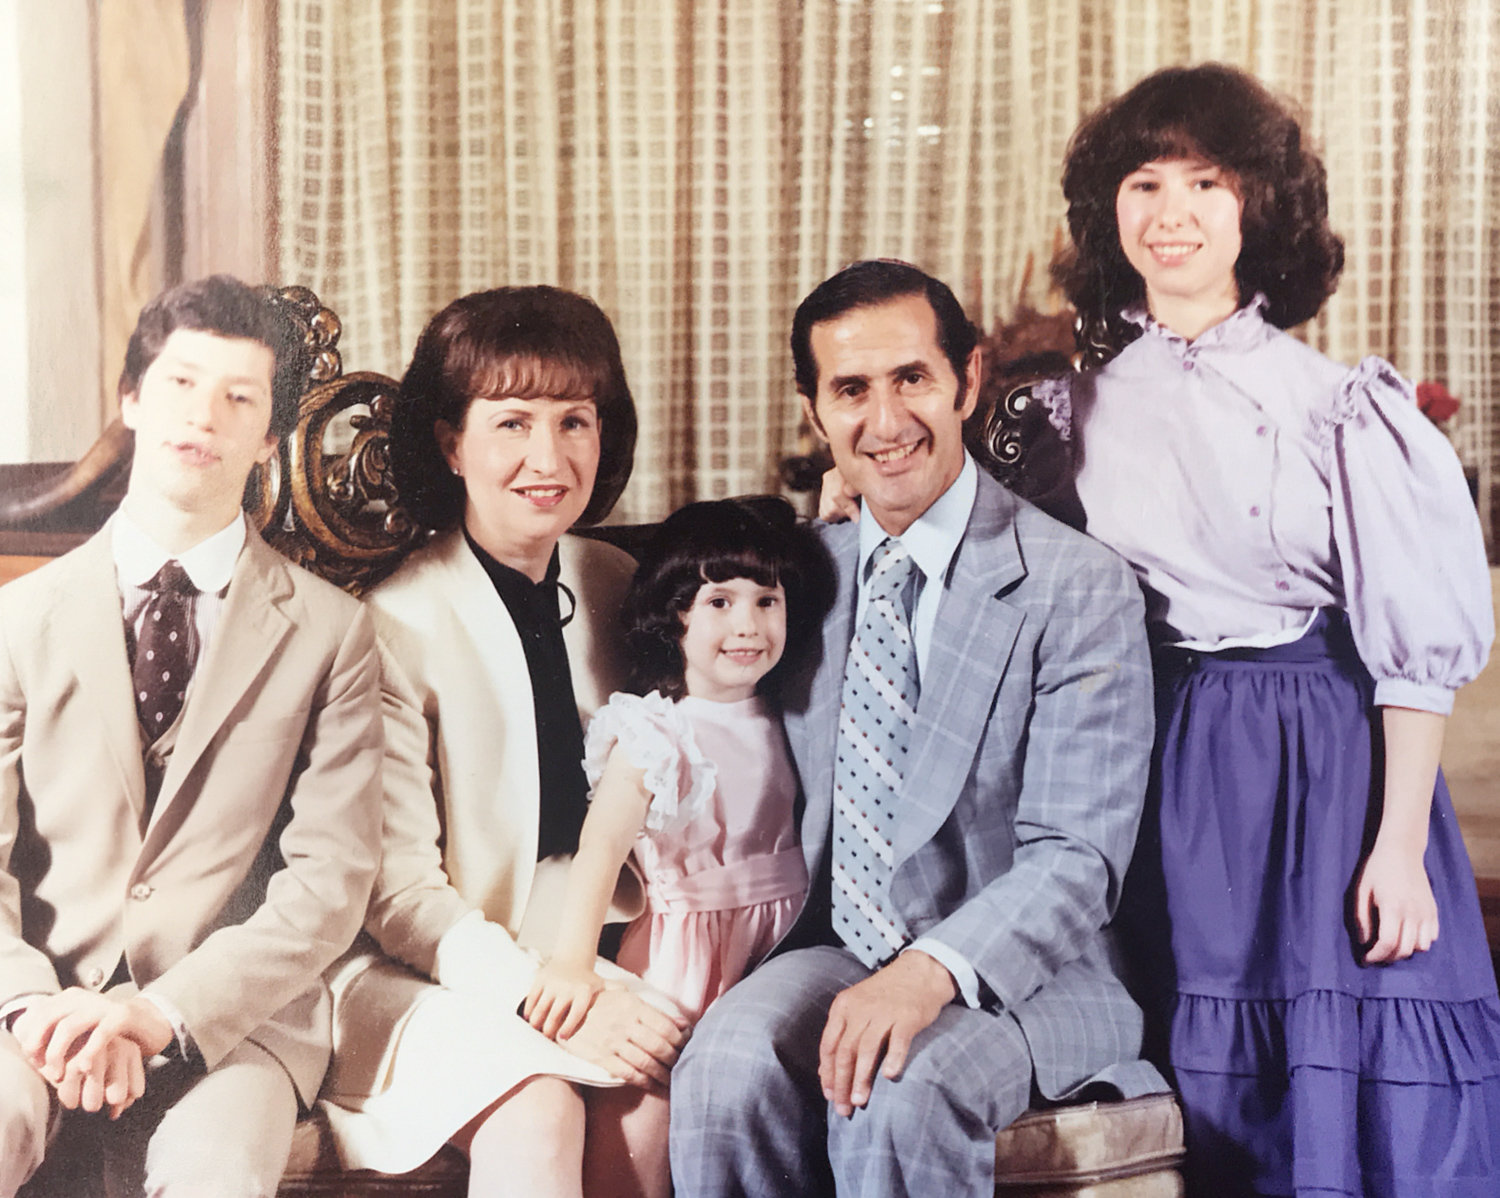 The Sopher family became a real estate stalwart in the northwest Bronx. The Sopher matriarch, Marilyn, second from left, died Feb. 22 at 84.